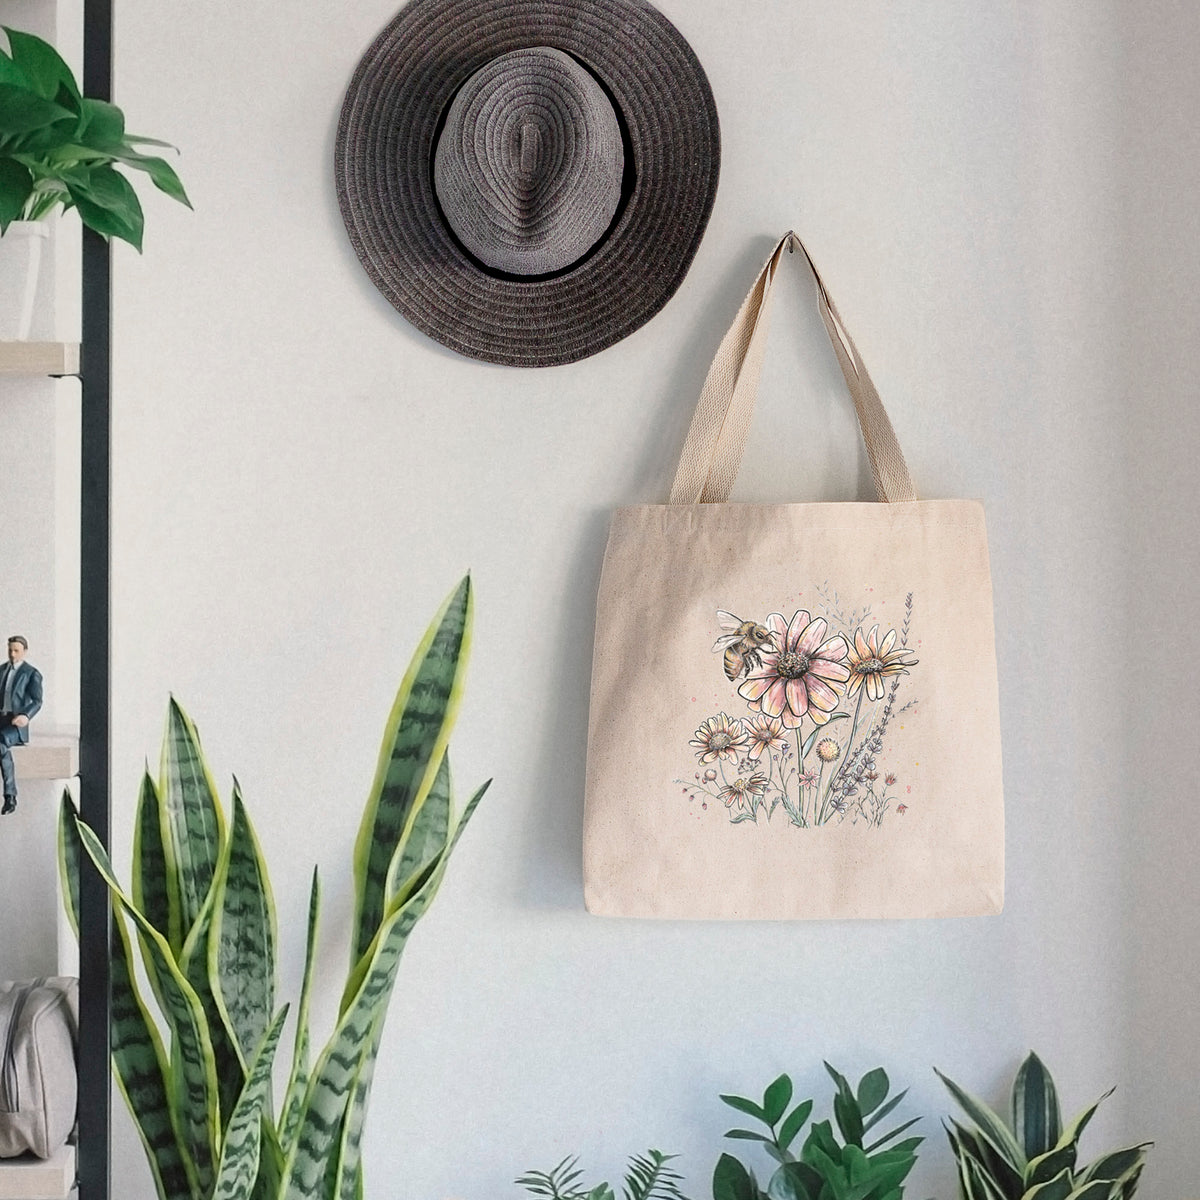 Bee with Wildflowers - Tote Bag